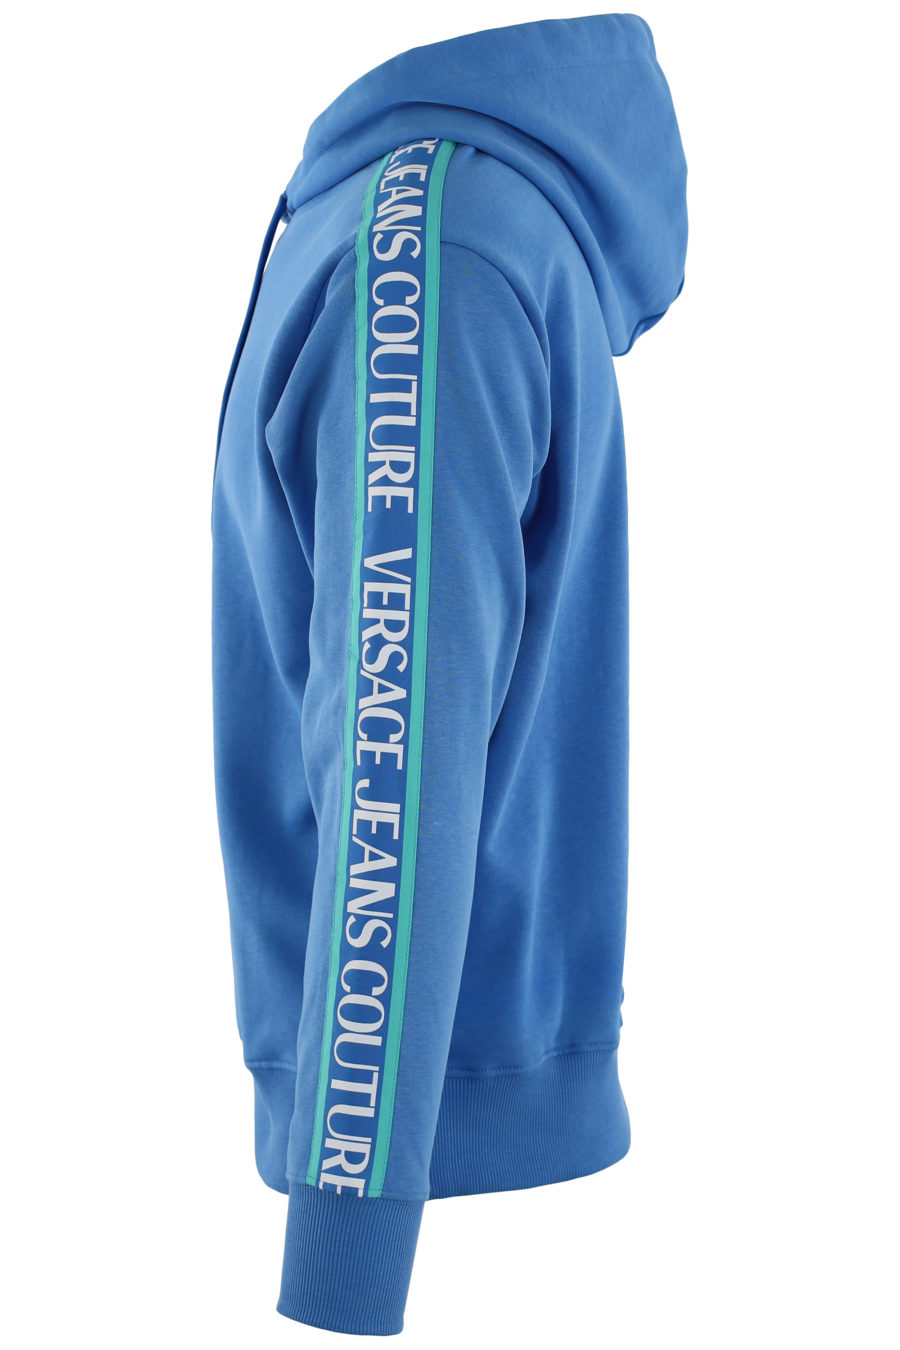 Blue sweatshirt with hood and blue ribbon with logo - IMG 0455